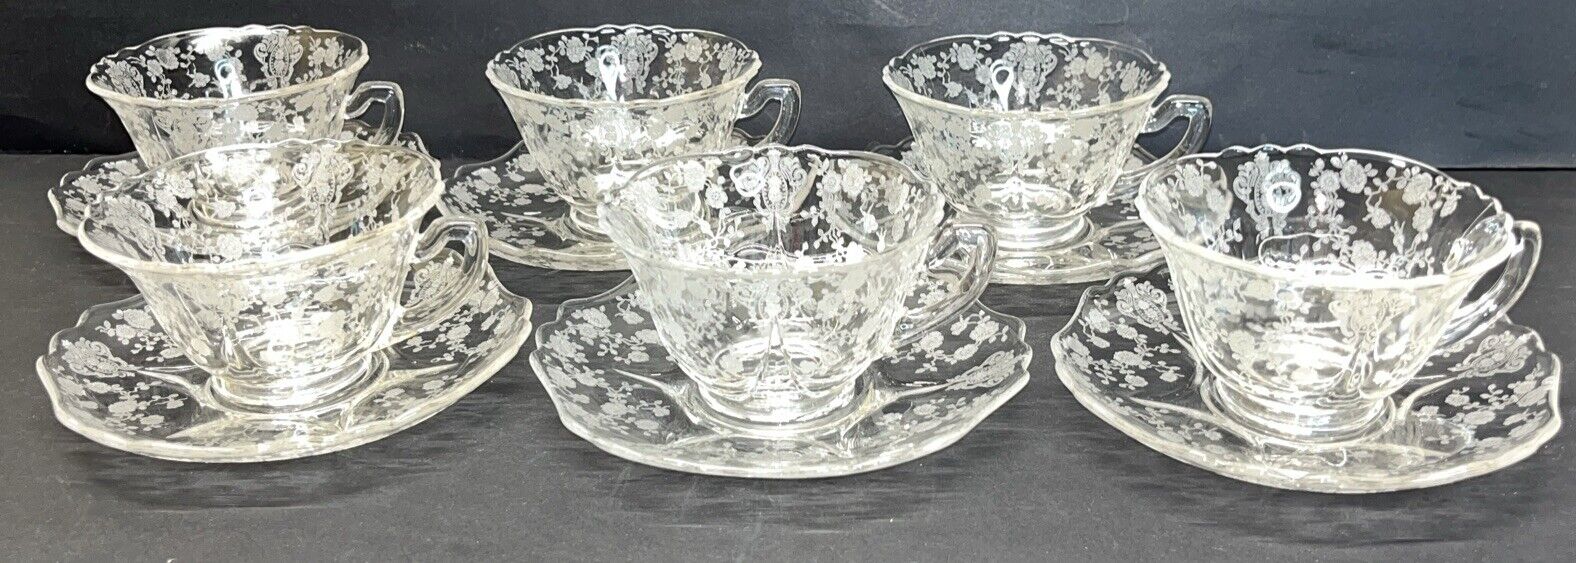 Six Cambridge Glass Rose Point Cup and Saucer Sets Style 3500